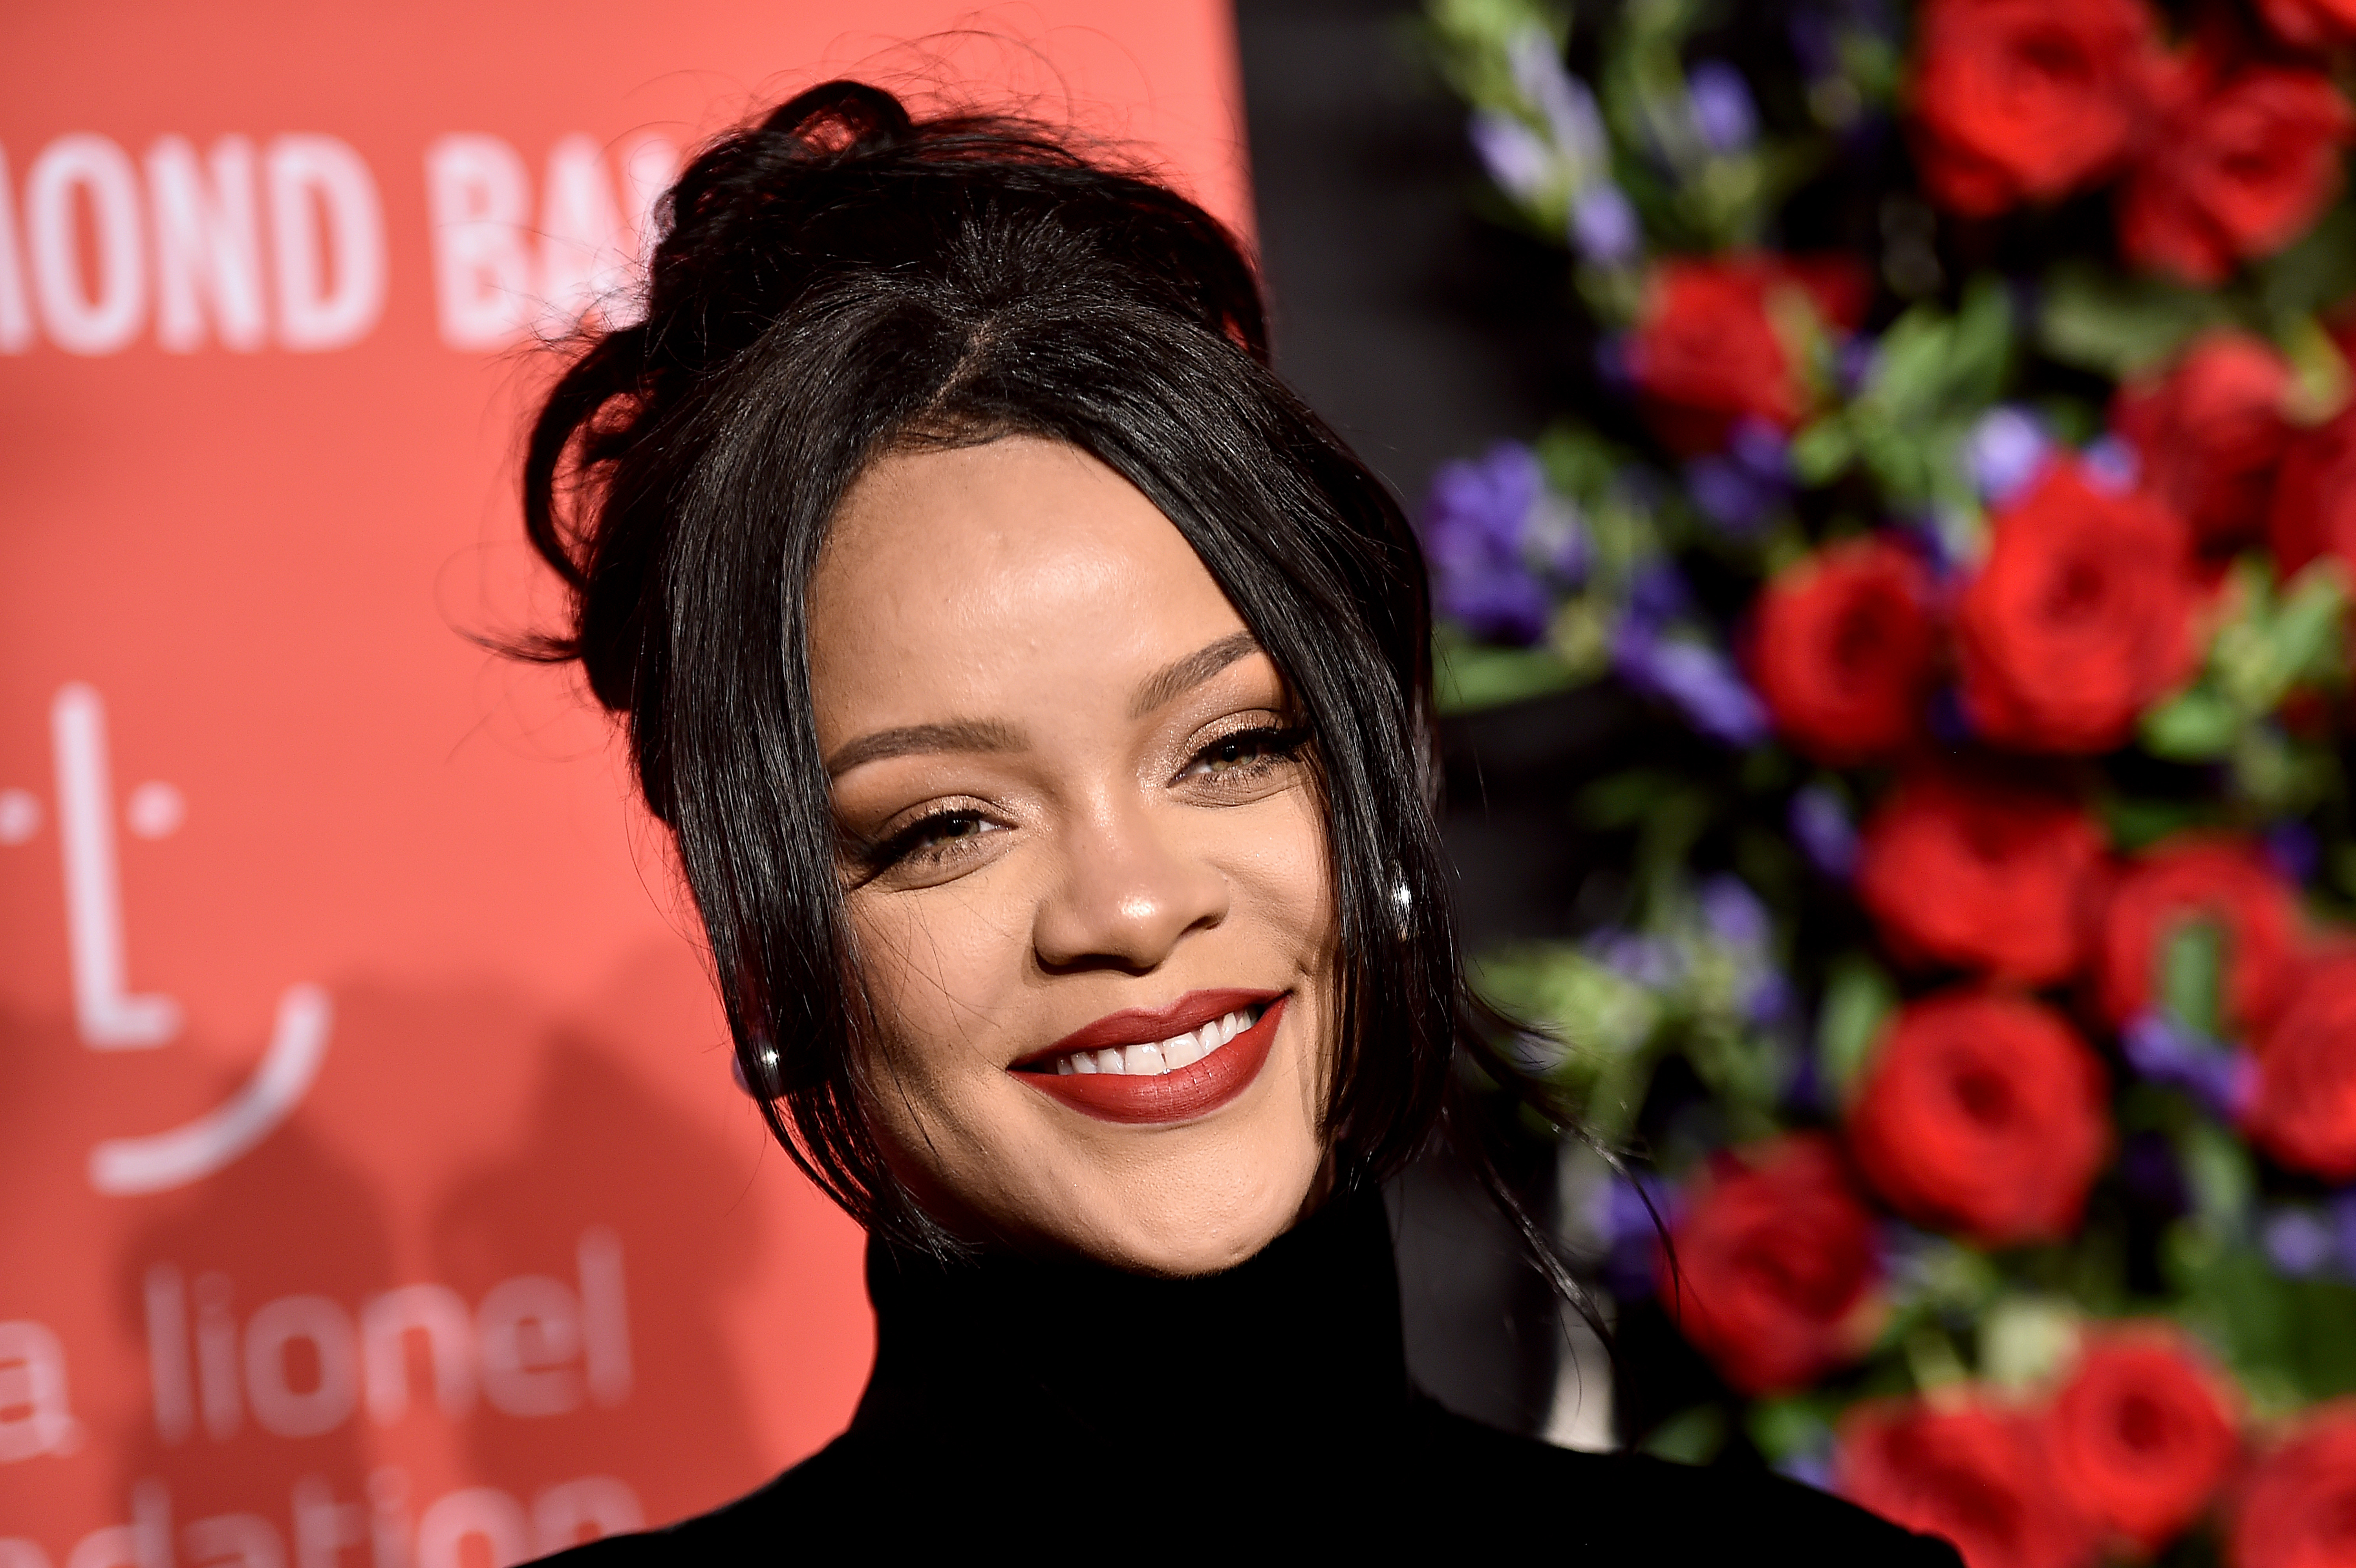 Rihanna attends Rihanna's 5th Annual Diamond Ball at Cipriani Wall Street on September 12, 2019, in New York City. | Source: Getty Images